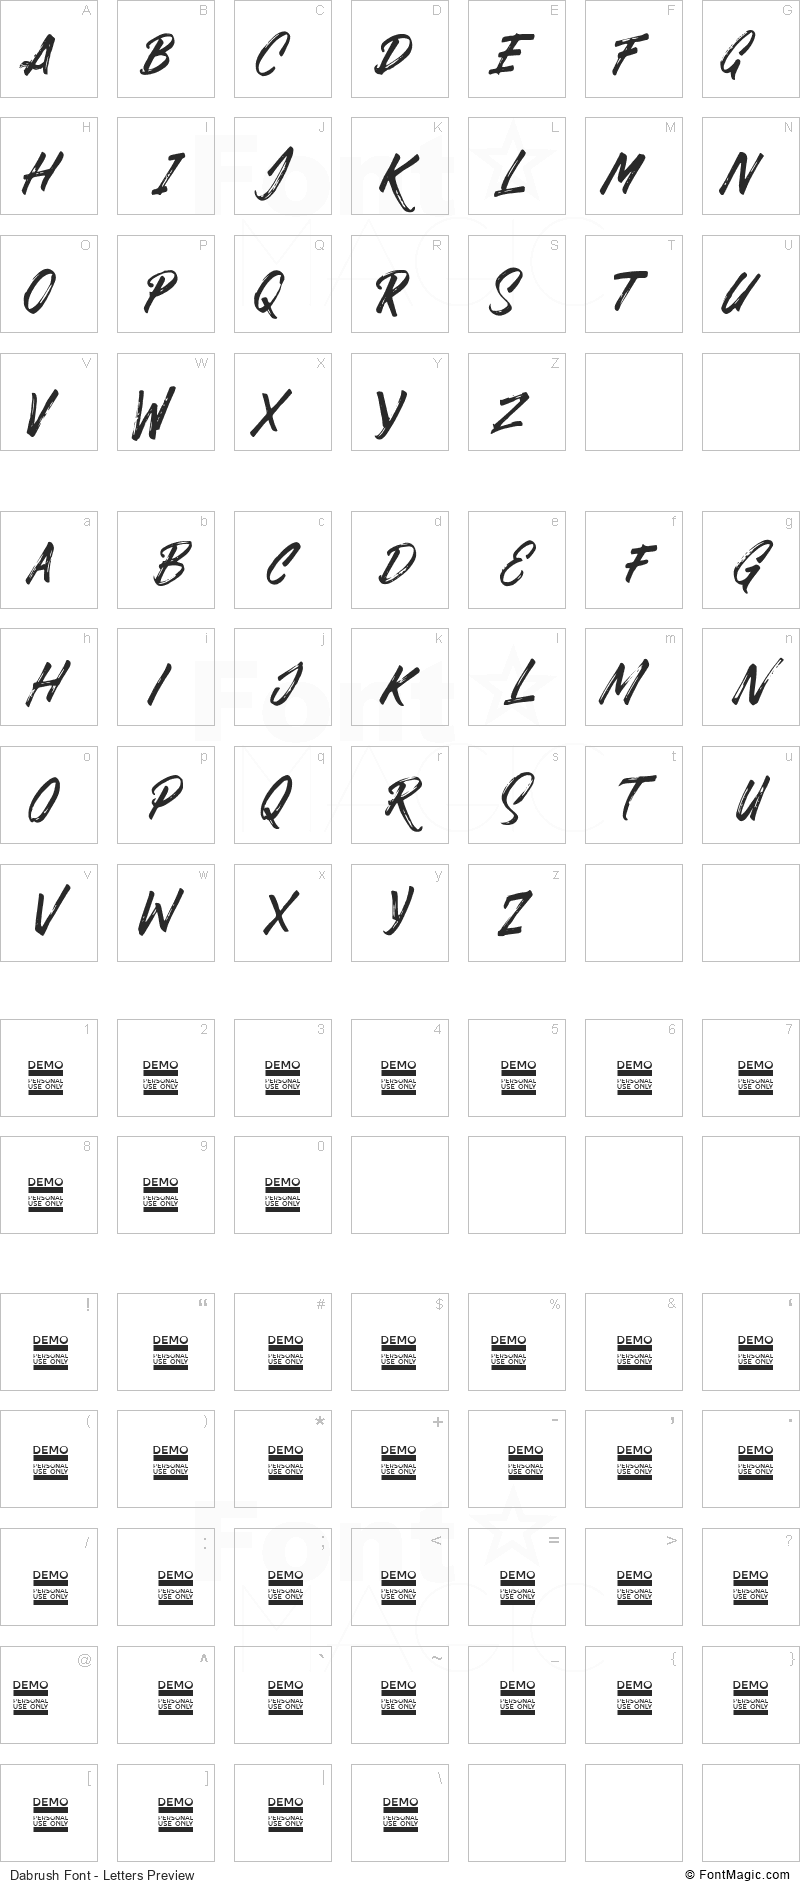 Dabrush Font - All Latters Preview Chart